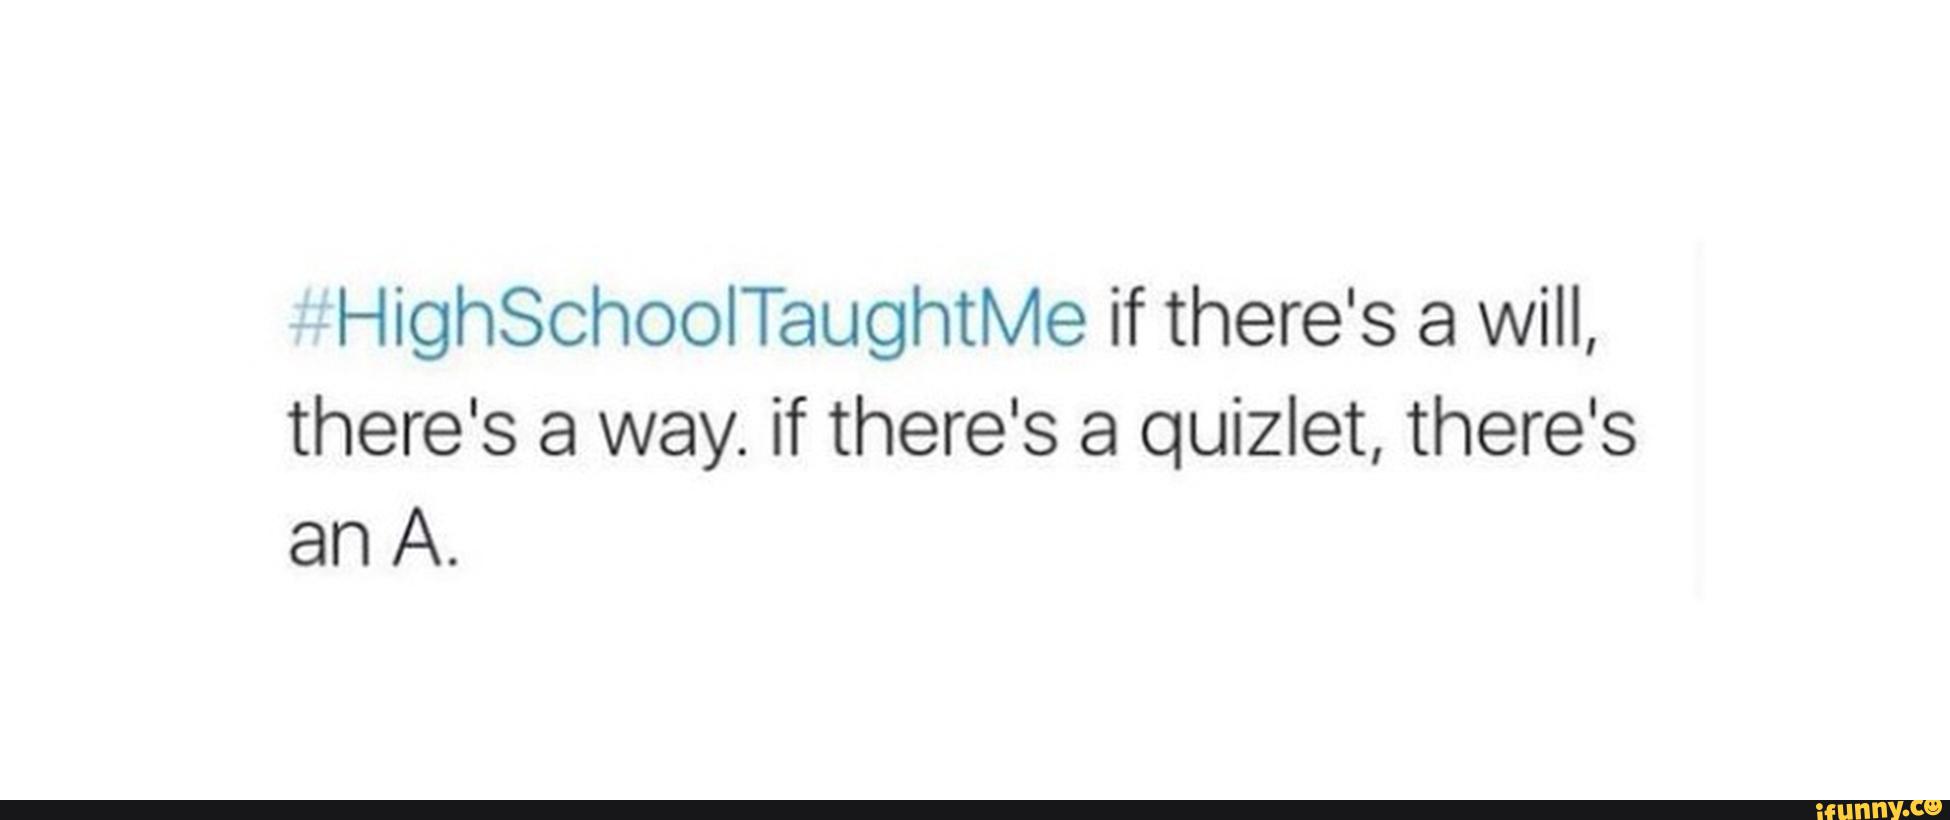 Highschooitaughtme If There S A Will There S A Way If There S A Quizlet There S An A